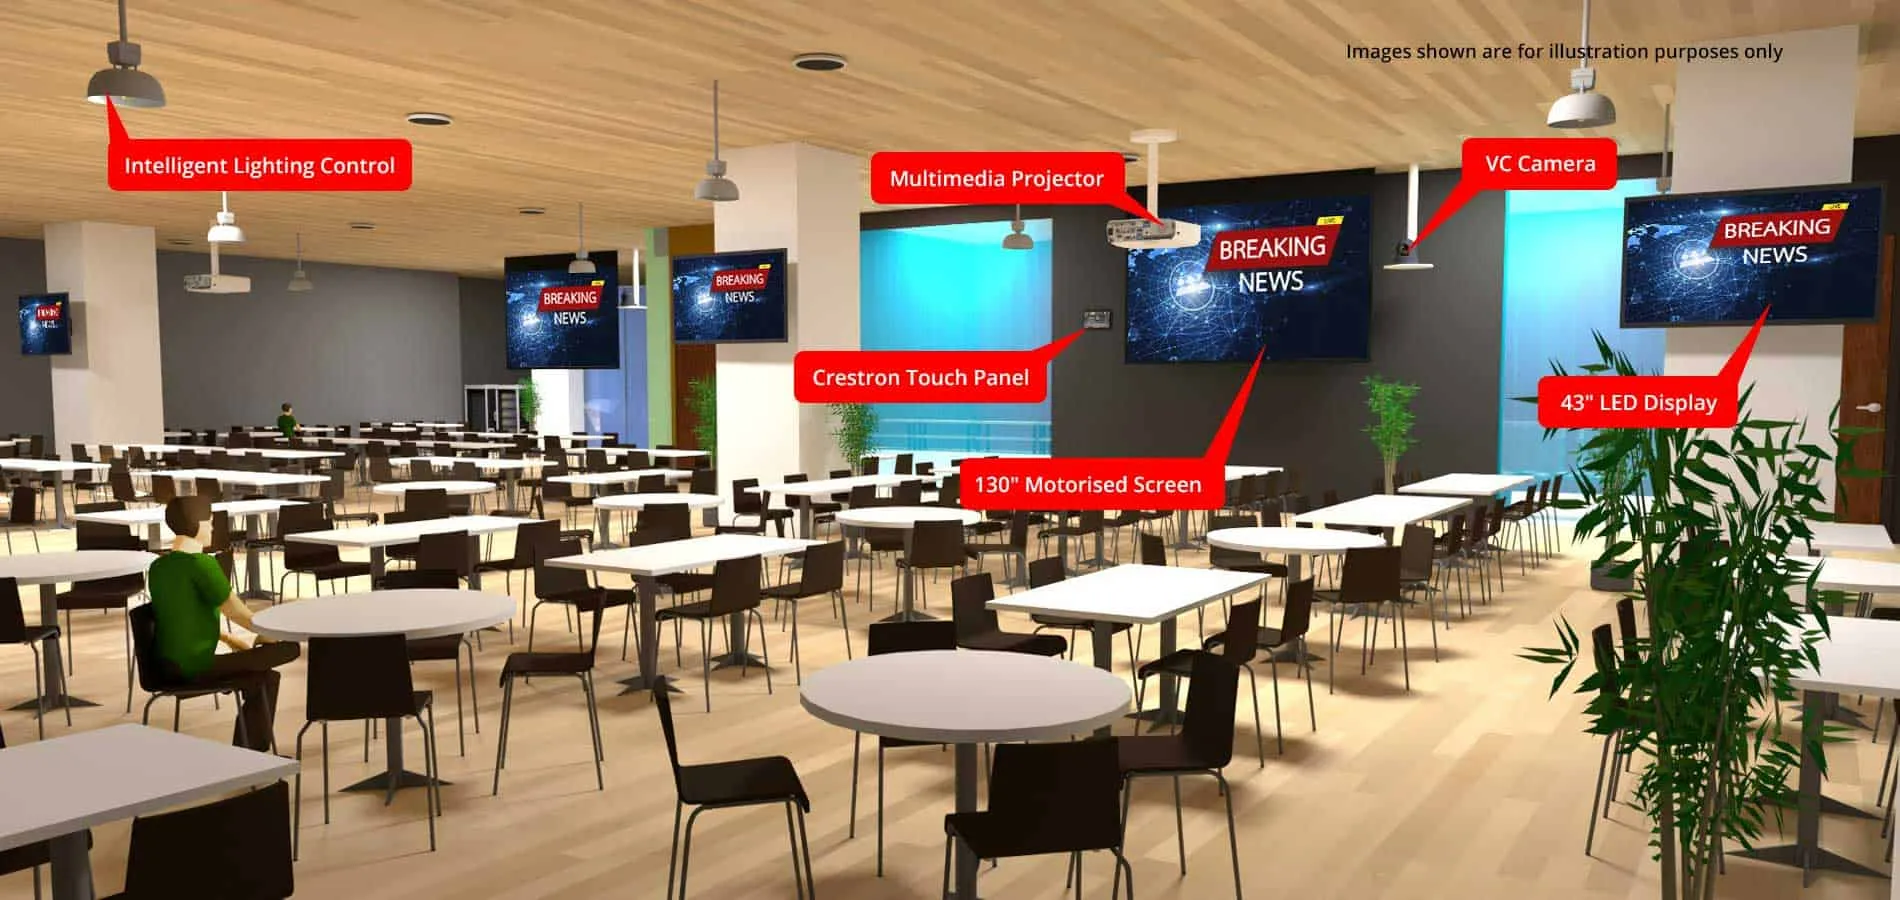 THE MULTI-PURPOSE CAFETERIA – CAN ACCOMMODATE UP TO 270 PEOPLE IN DINING MODE